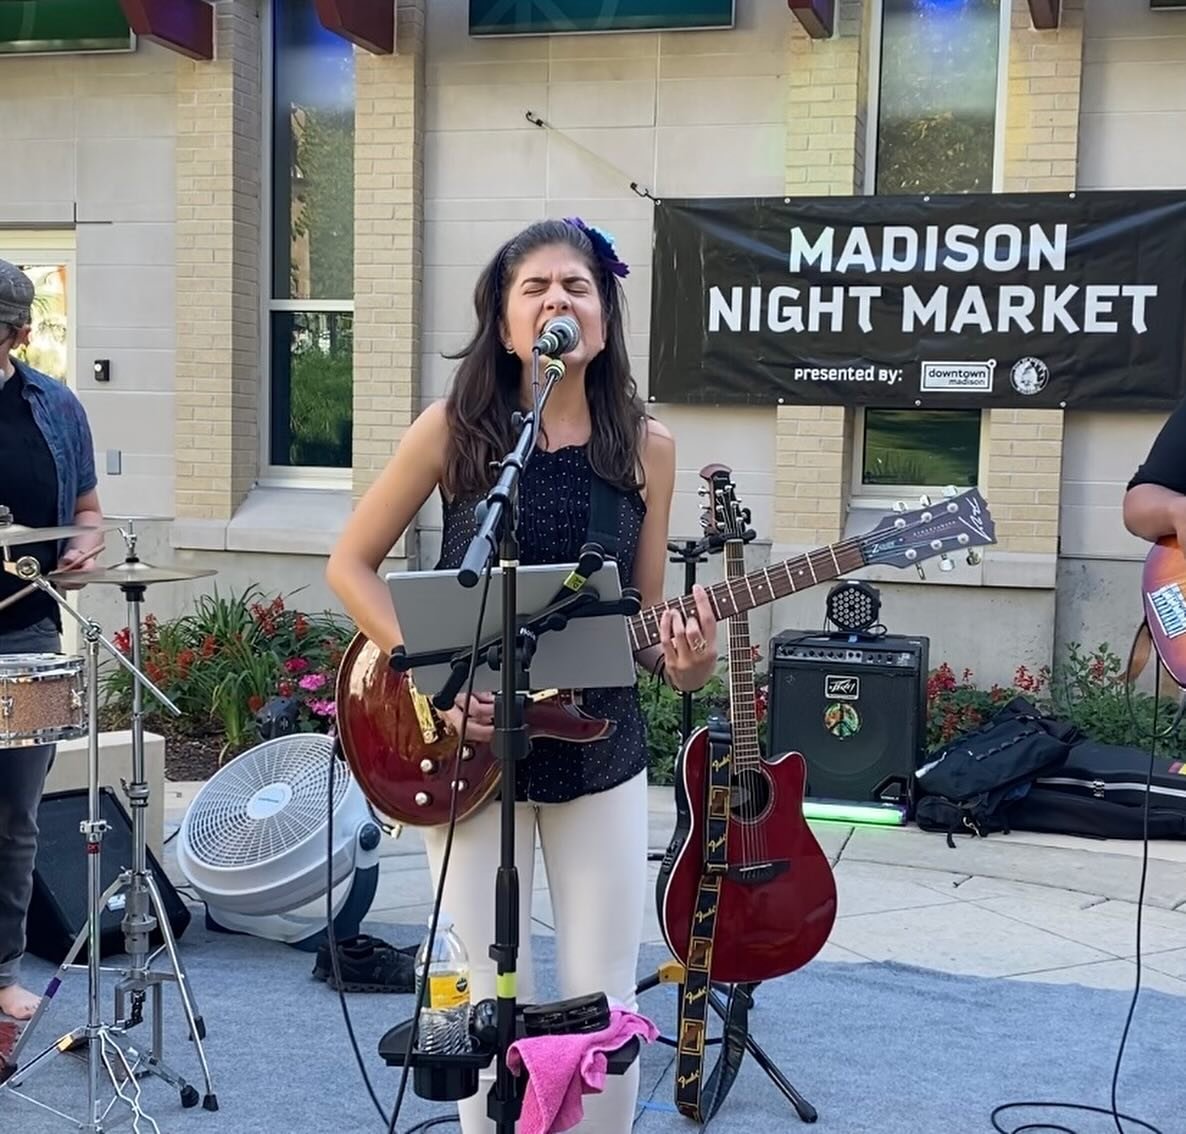 #MNM or #MadisonNightMarket Tomorrow Thursday night, my four-piece band will be performing during the Madison Night Market in the downtown from 7-9pm at LISA LINK PEACE PARK, 452 STATE STREET MADISON, WI, 53703. We hope to see some of you there 🥰